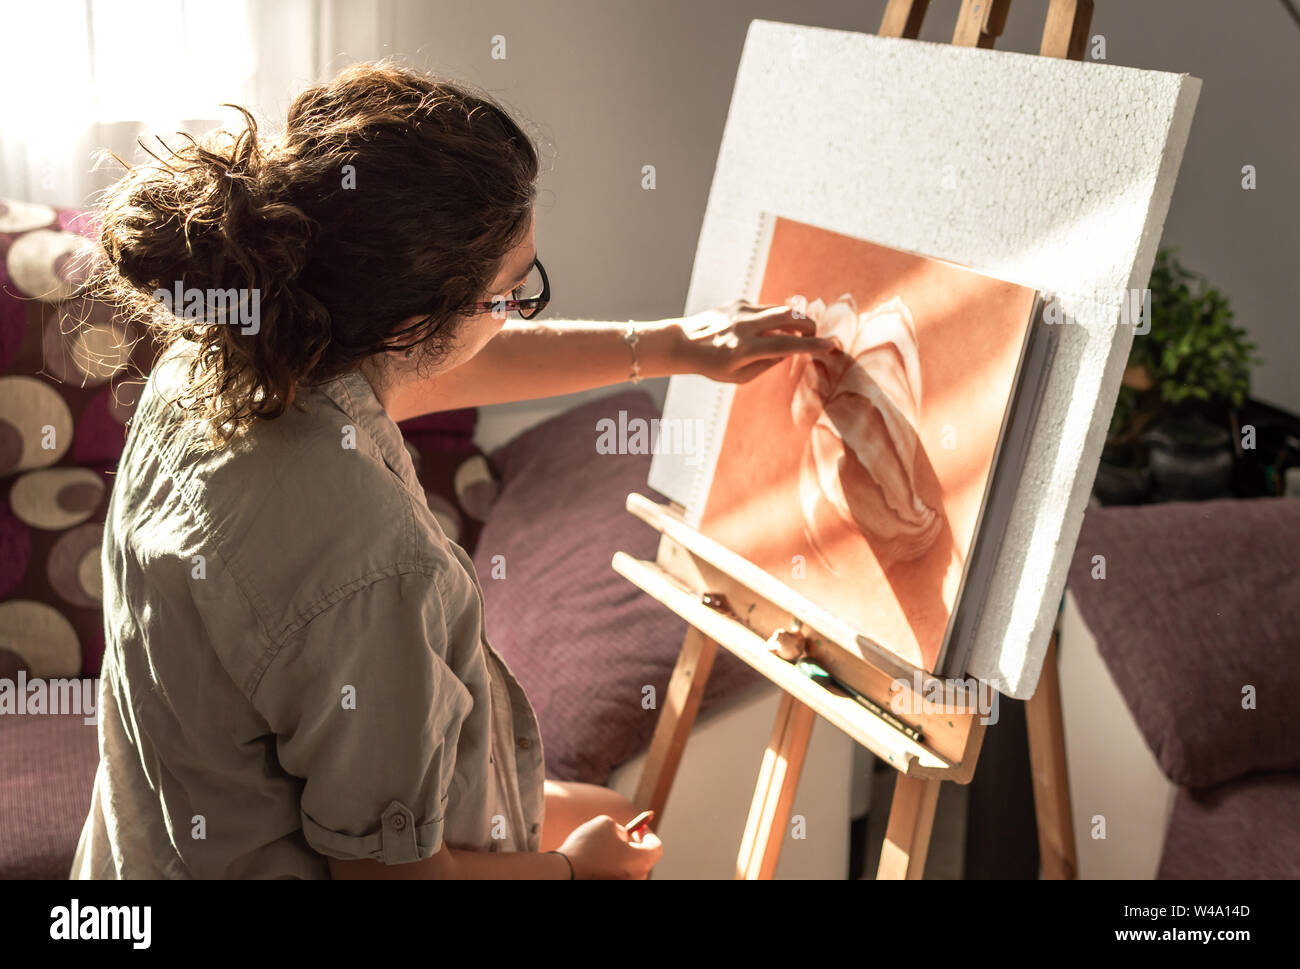 Woman with casual clothes and glasses painting with sanguine or red chalk. Drawing at home in front of a sunny window with easel. Stock Photo